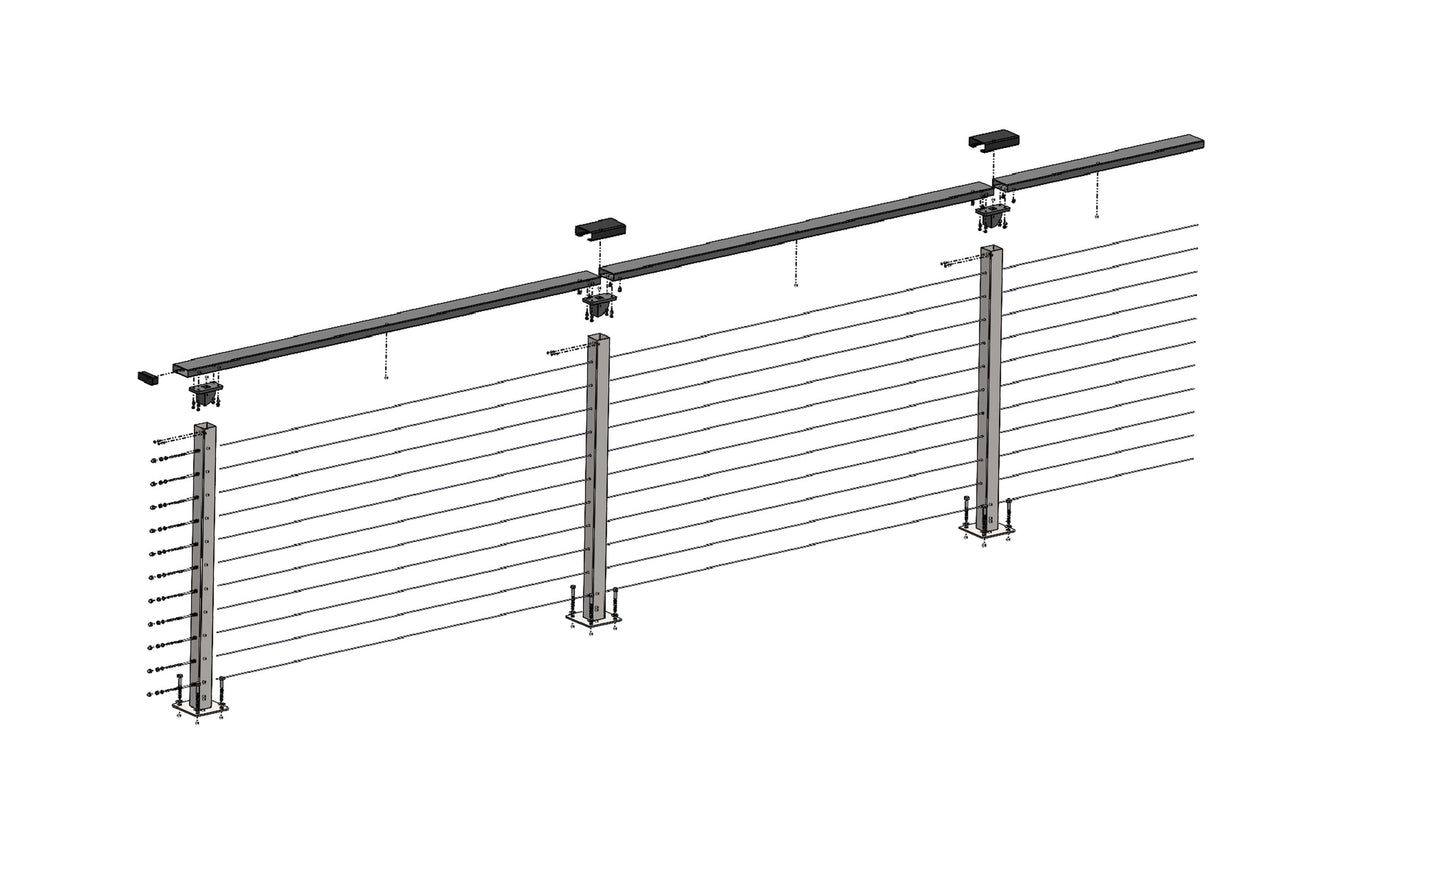 27 ft. x 42 in. White Deck Cable Railing, Base Mount